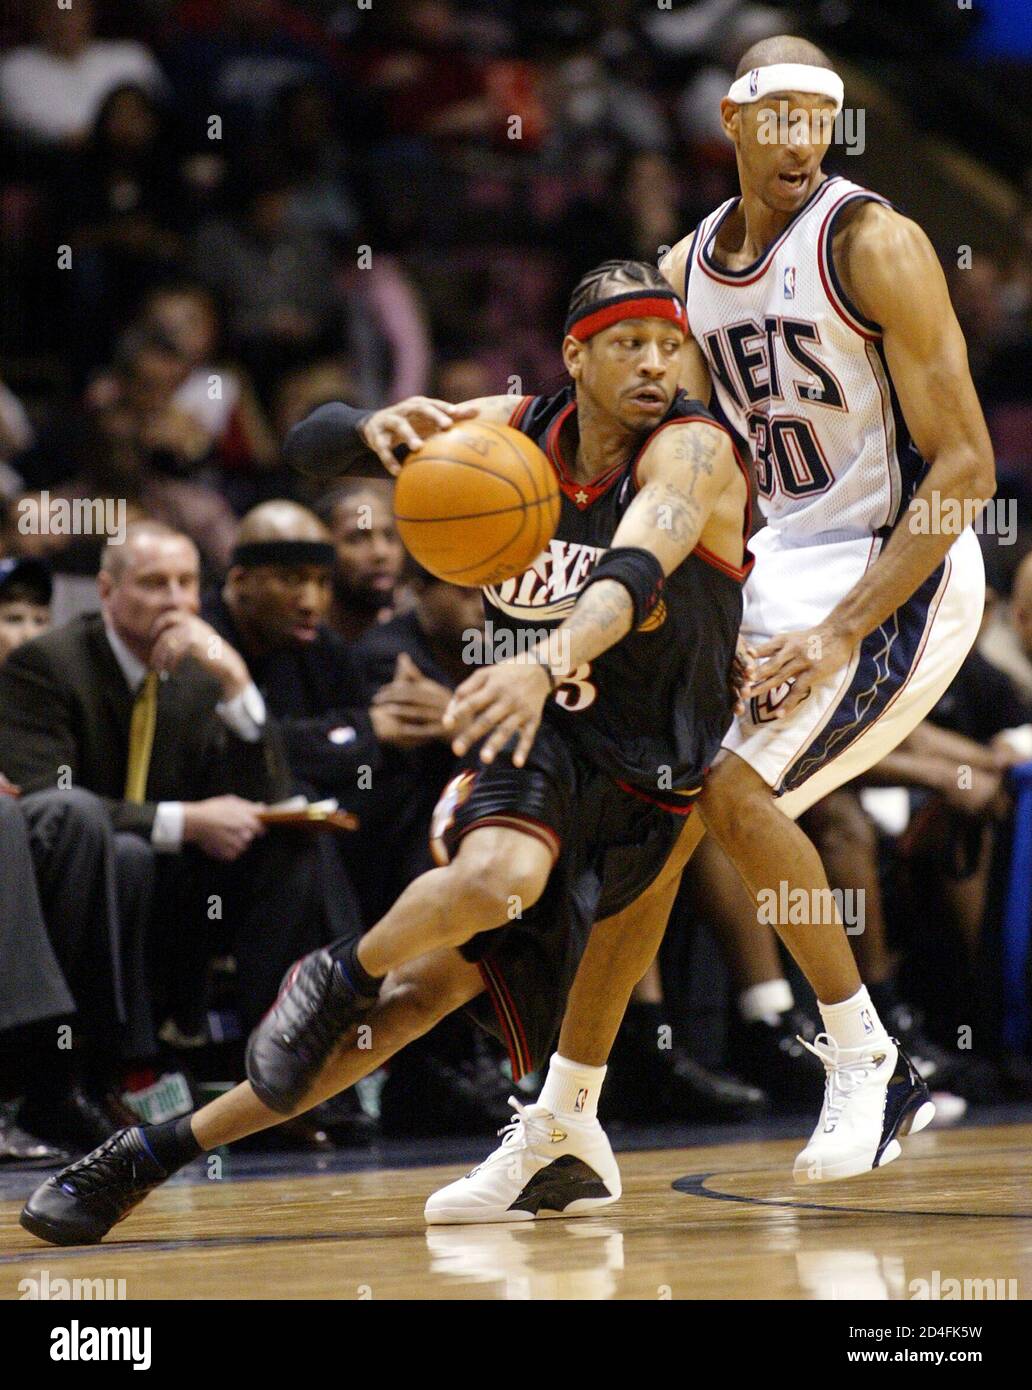 Philadelphia 76ers guard Allen Iverson (L) drives around New Jersey Nets  guard Jason Kittles (R) in the first period of their NBA game February 8,  2004 in East Rutherford, New Jersey. REUTERS/Ray